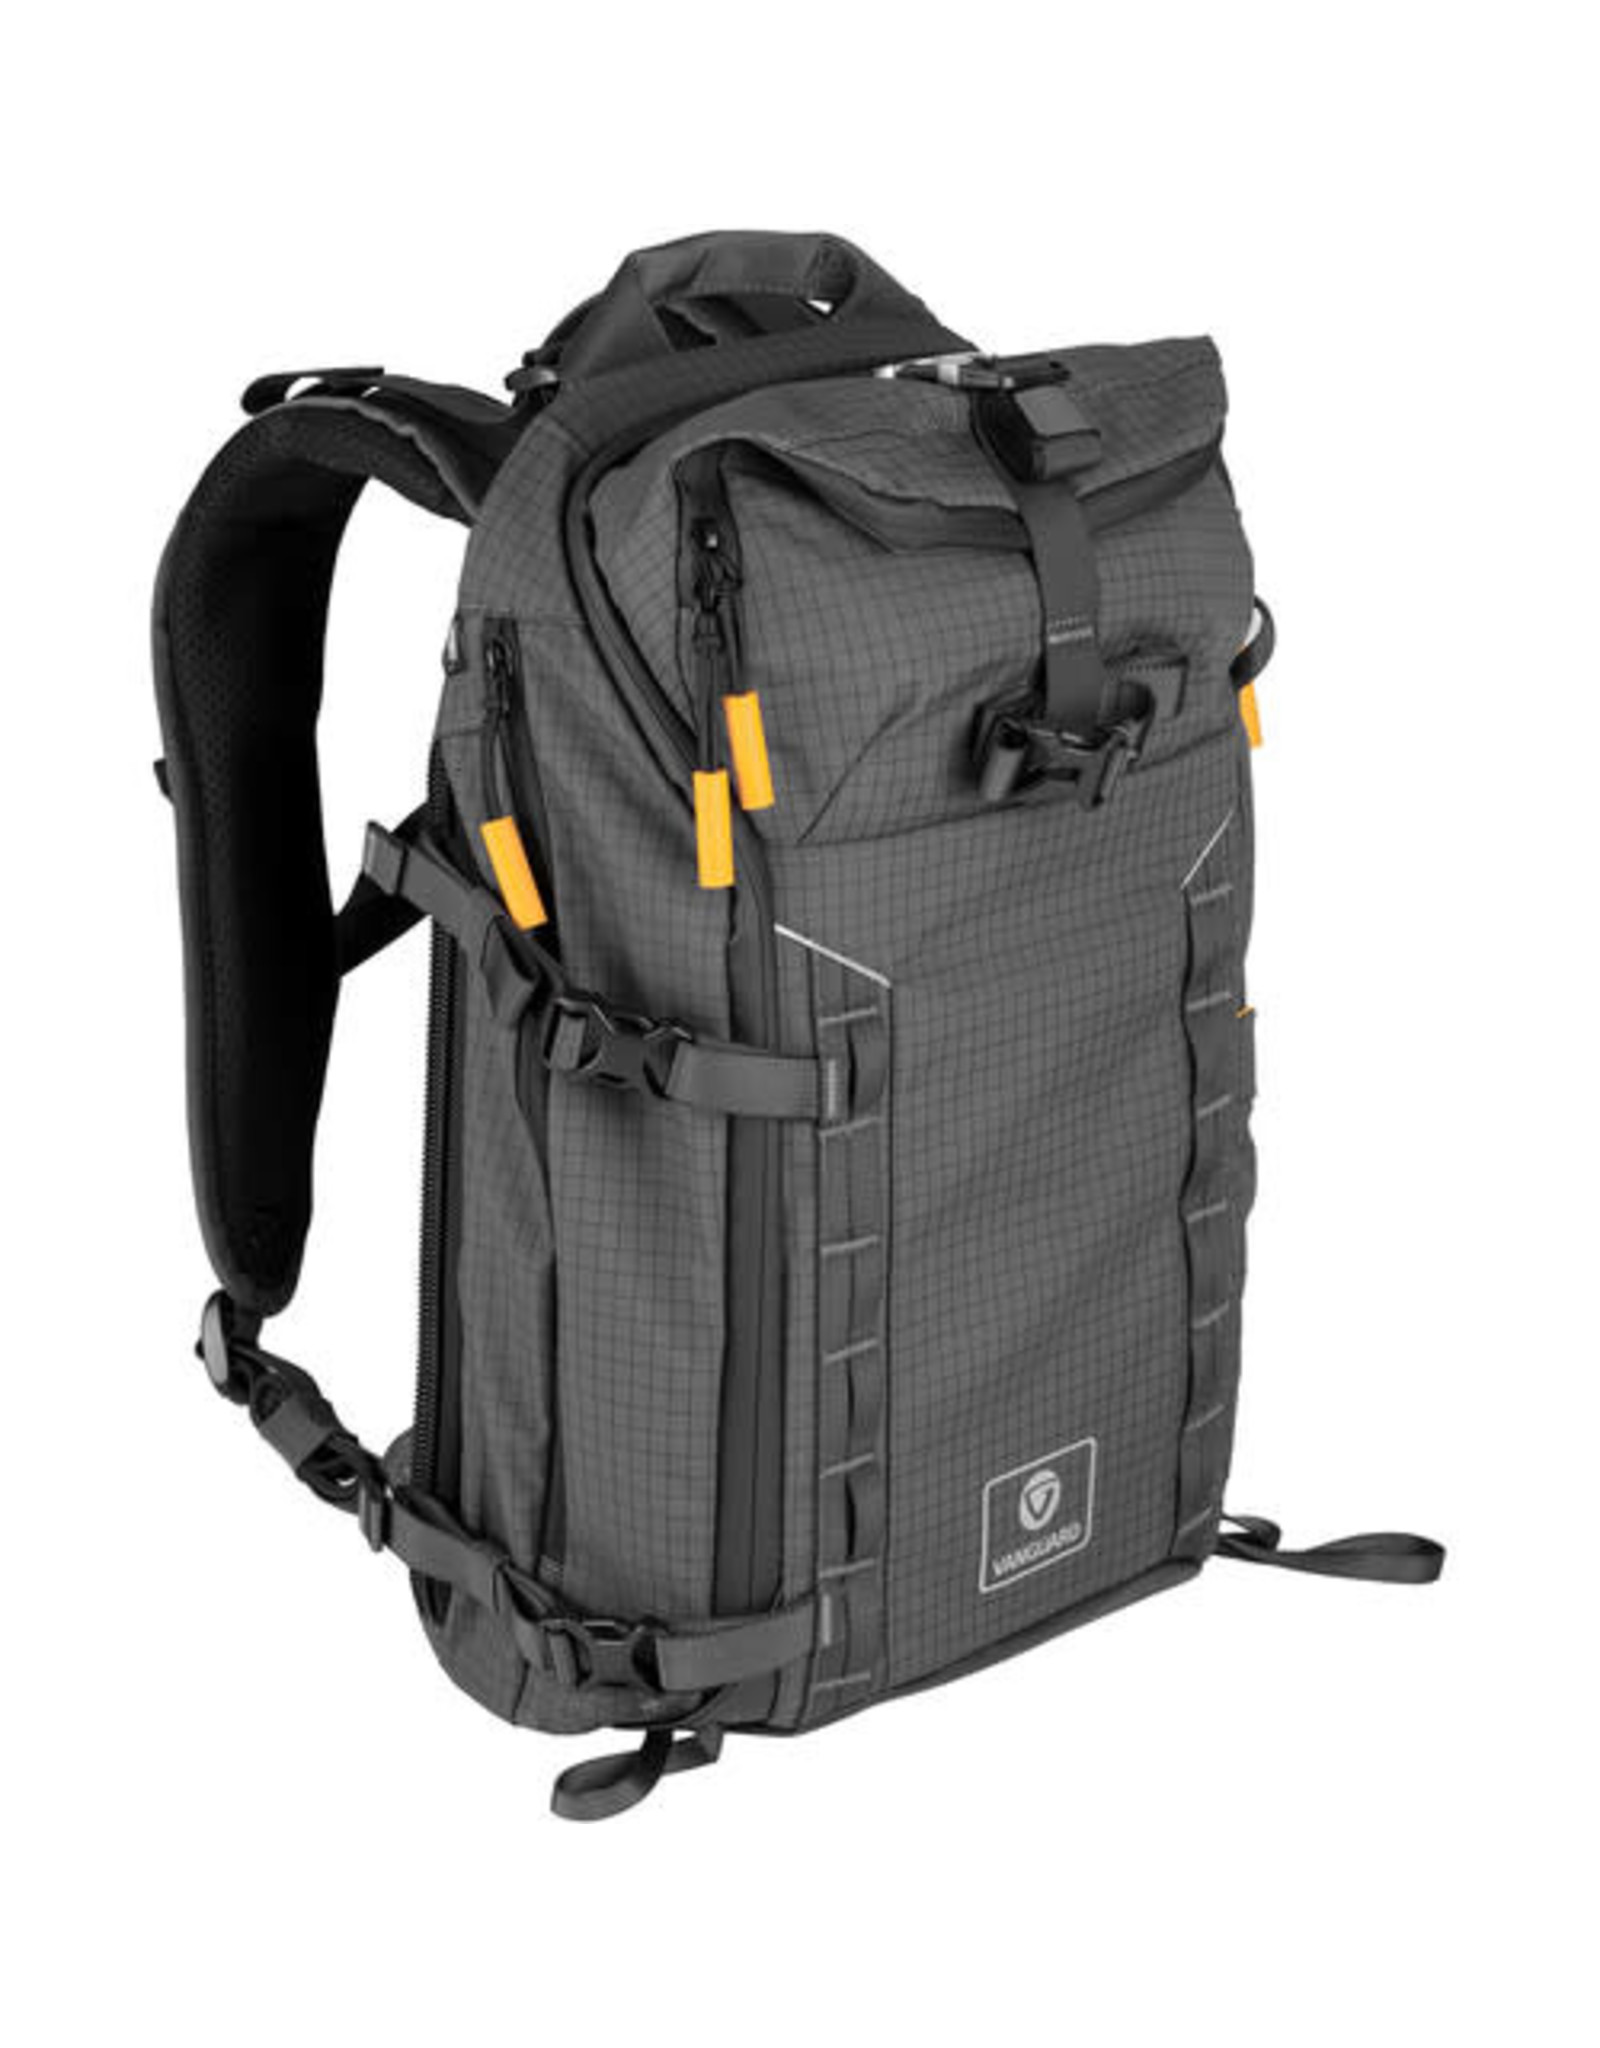 Vanguard VEO ACTIVE 42M CAMERA BACKPACK W/ USB CHARGER CONNECTOR (CHOOSE COLOR)